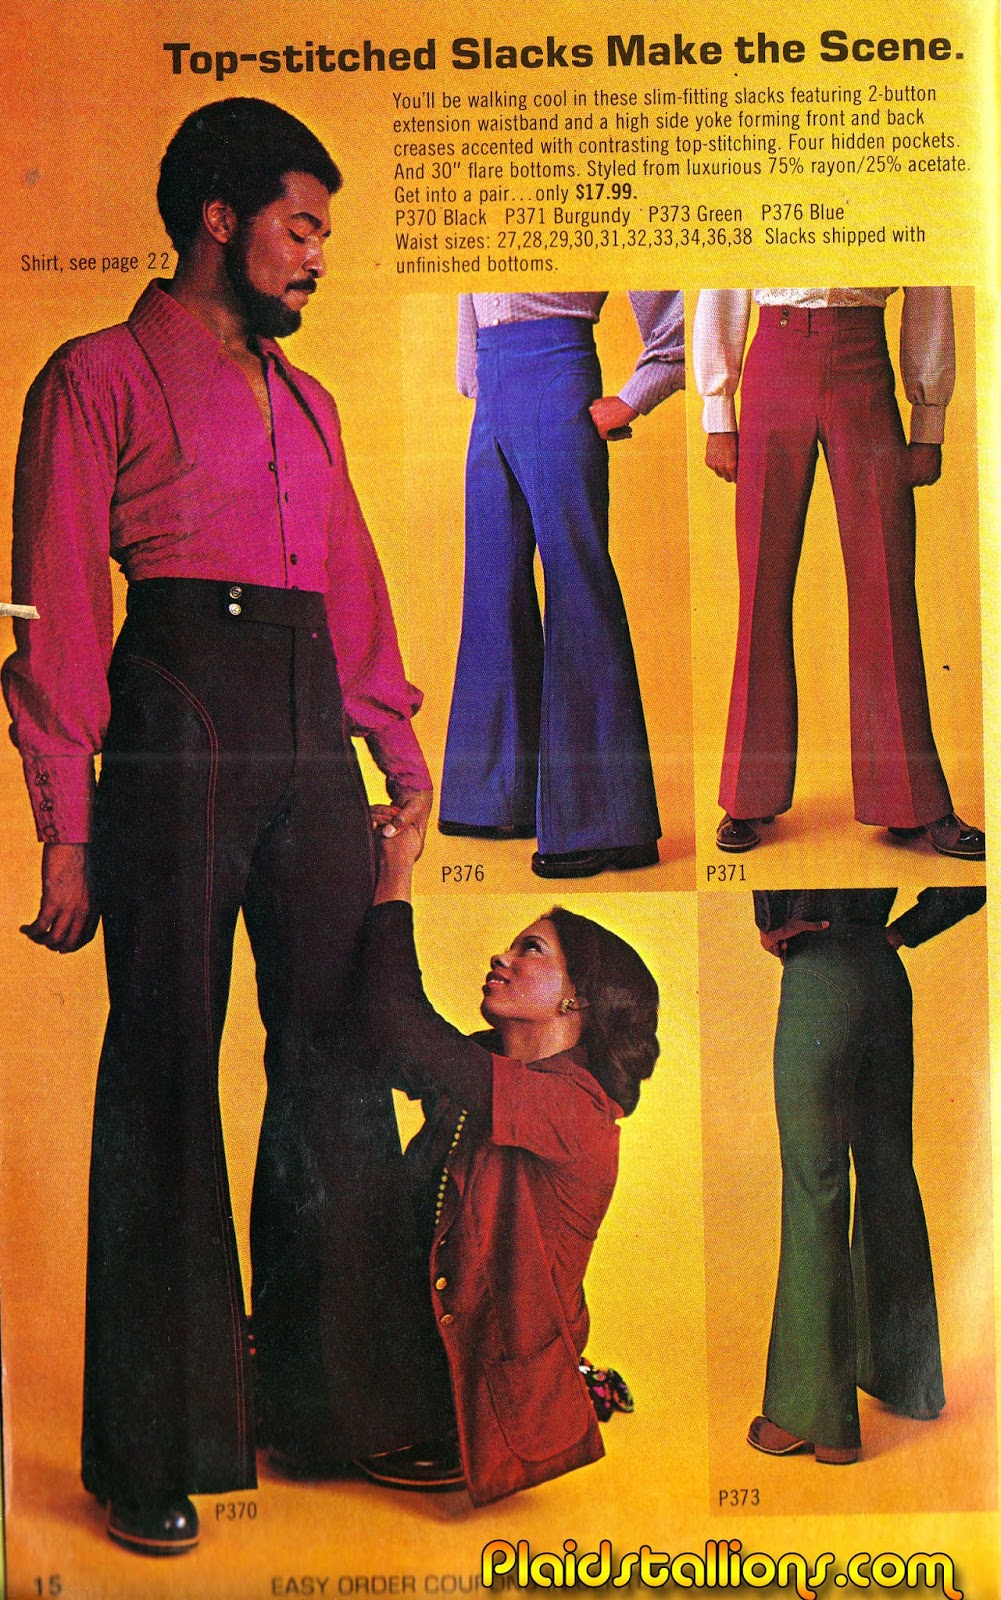 Plaid Stallions : Rambling and Reflections on '70s pop culture: Top ...